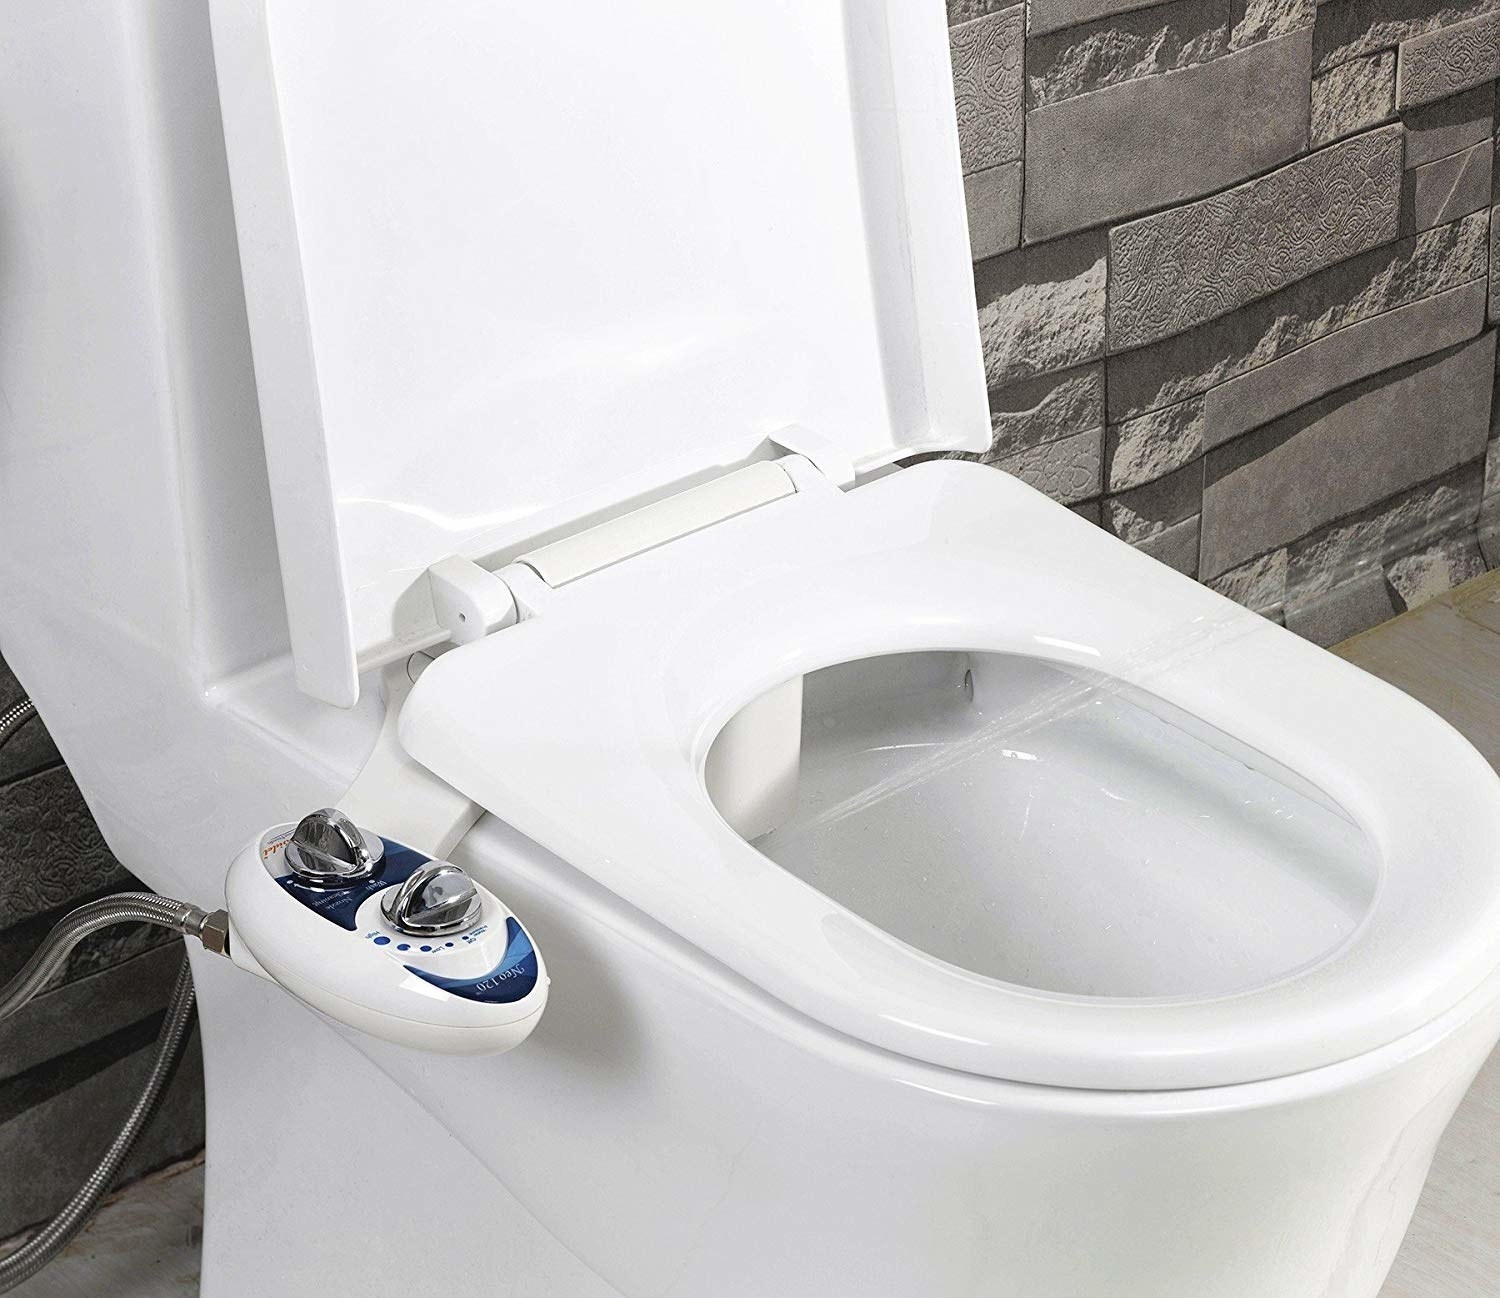 The bidet attached to a toilet